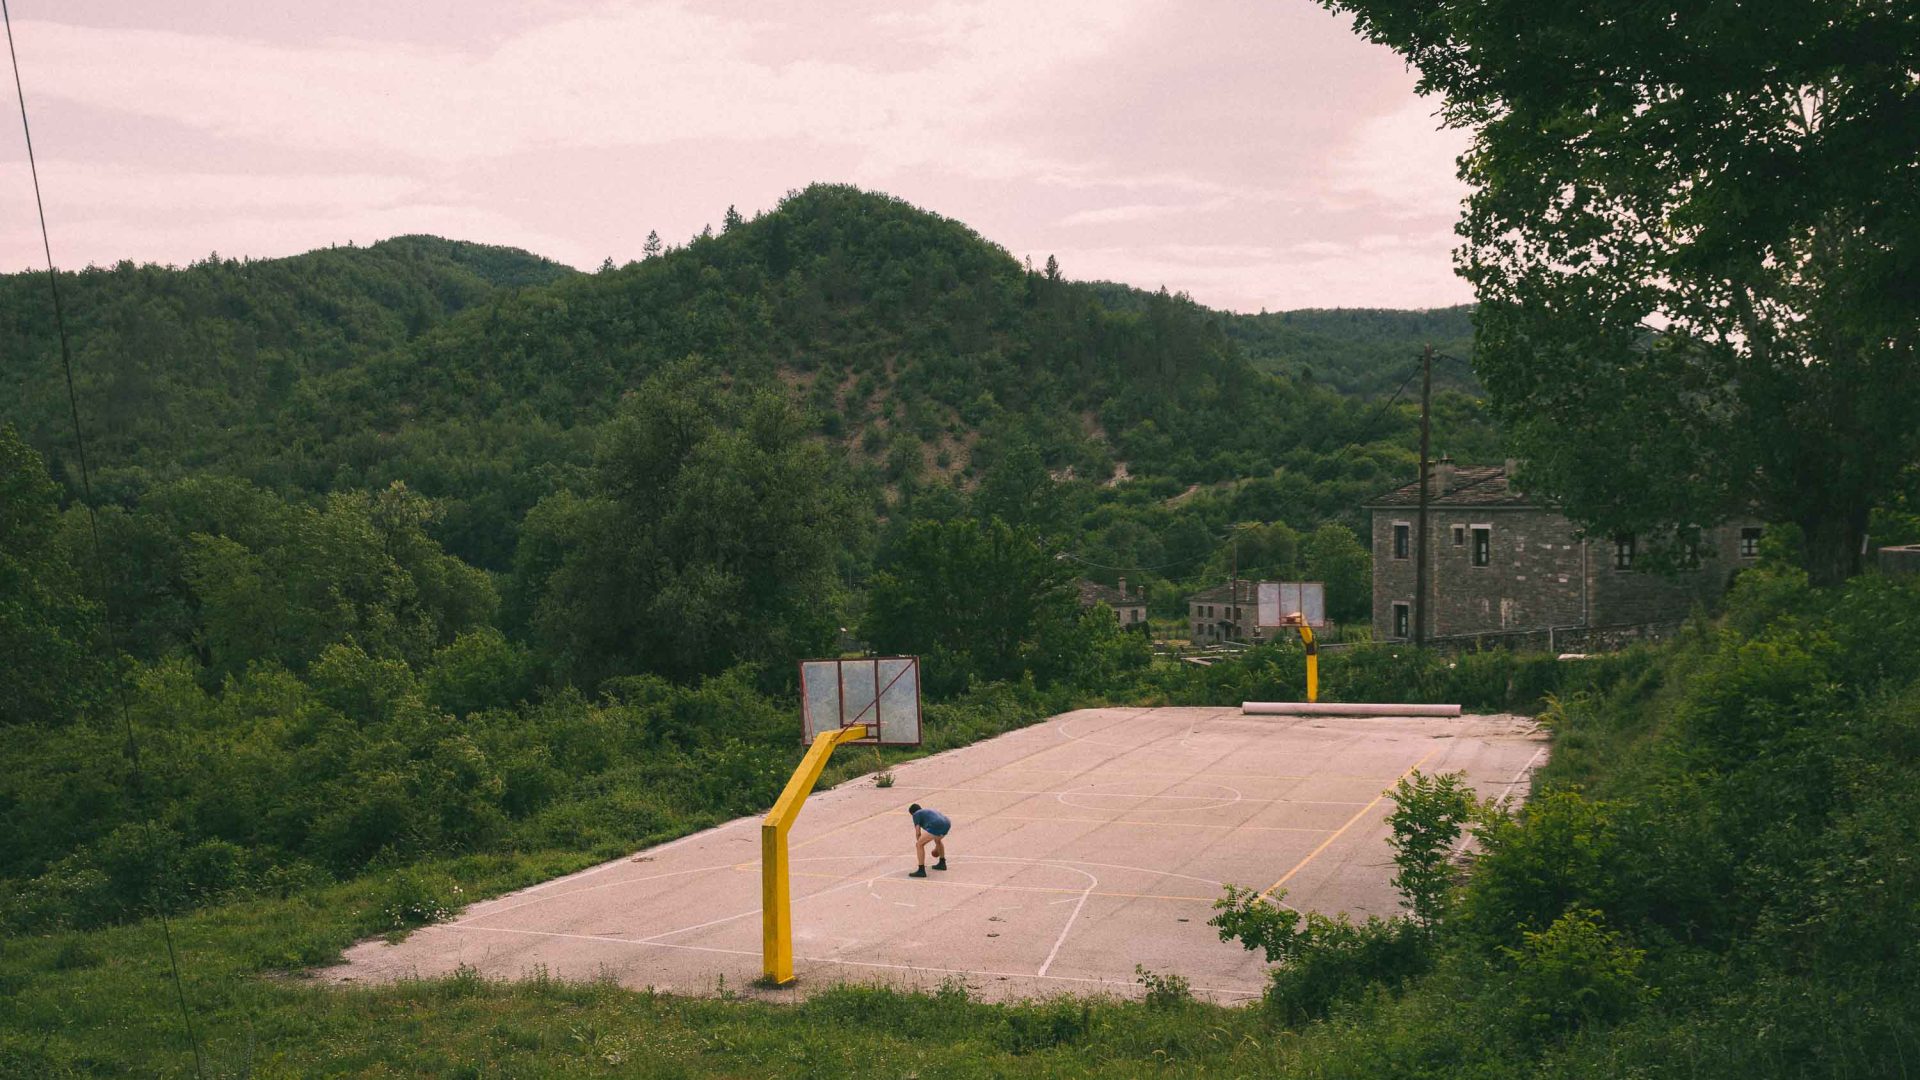 A lone person plays on a basketball court surrounded by hills.